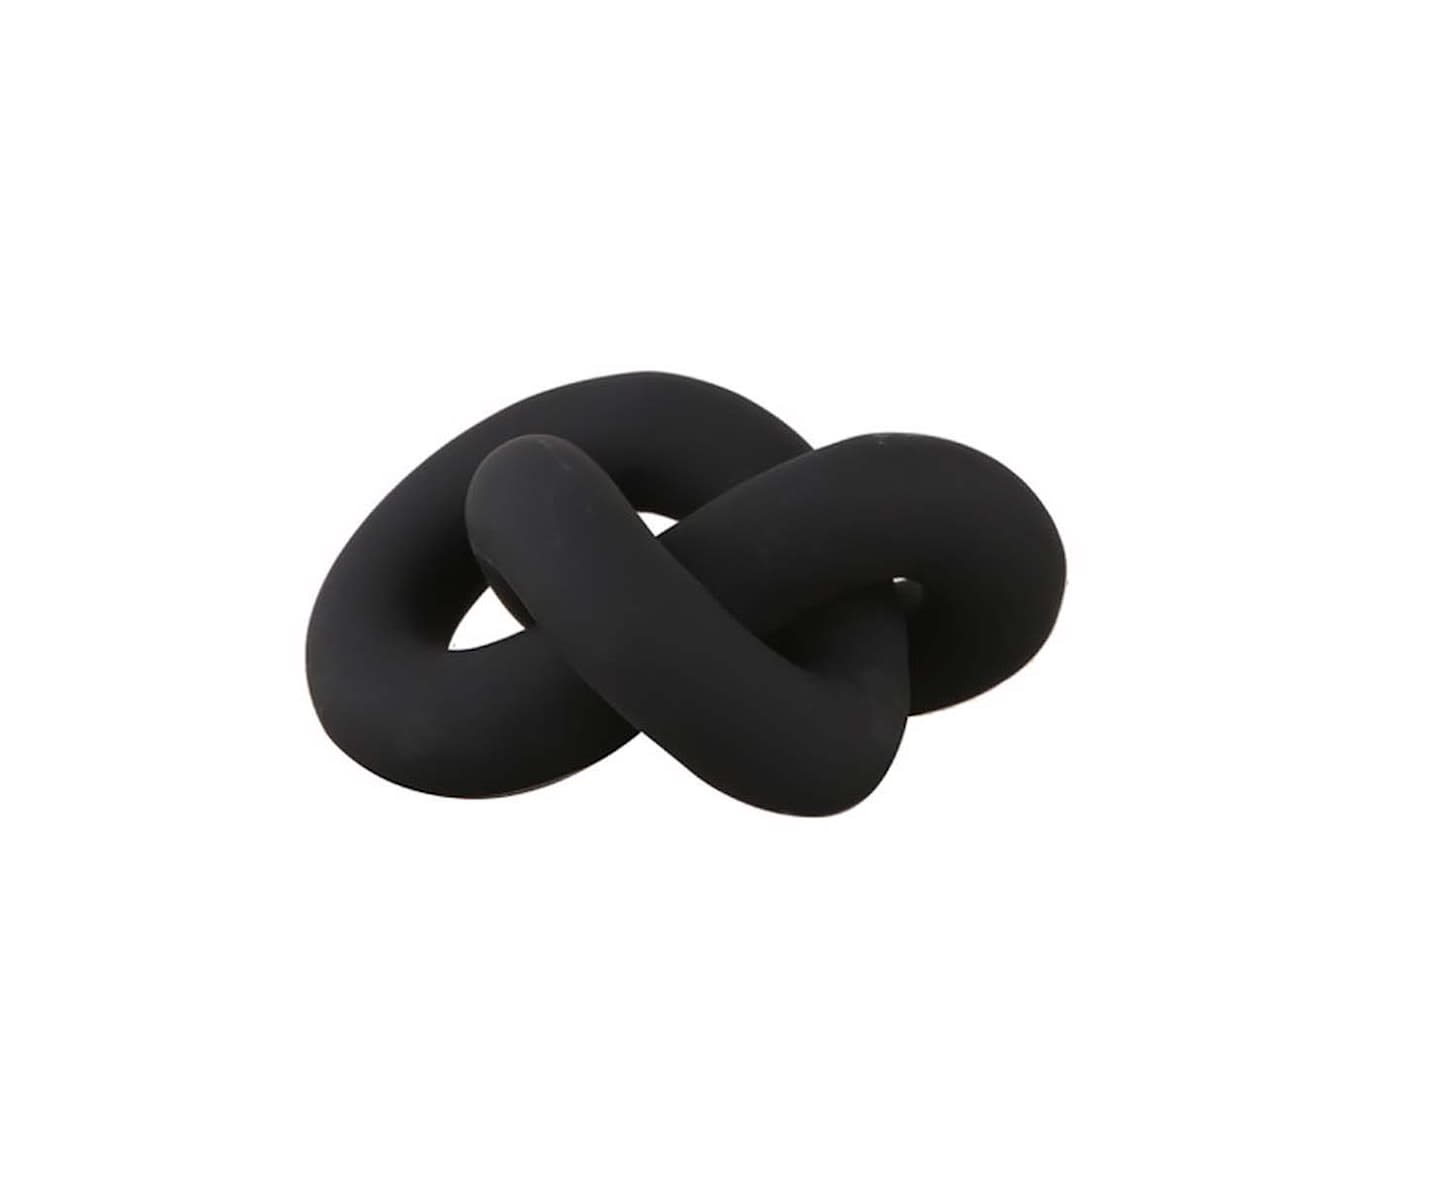 Cooee Design Knot Table Large Black